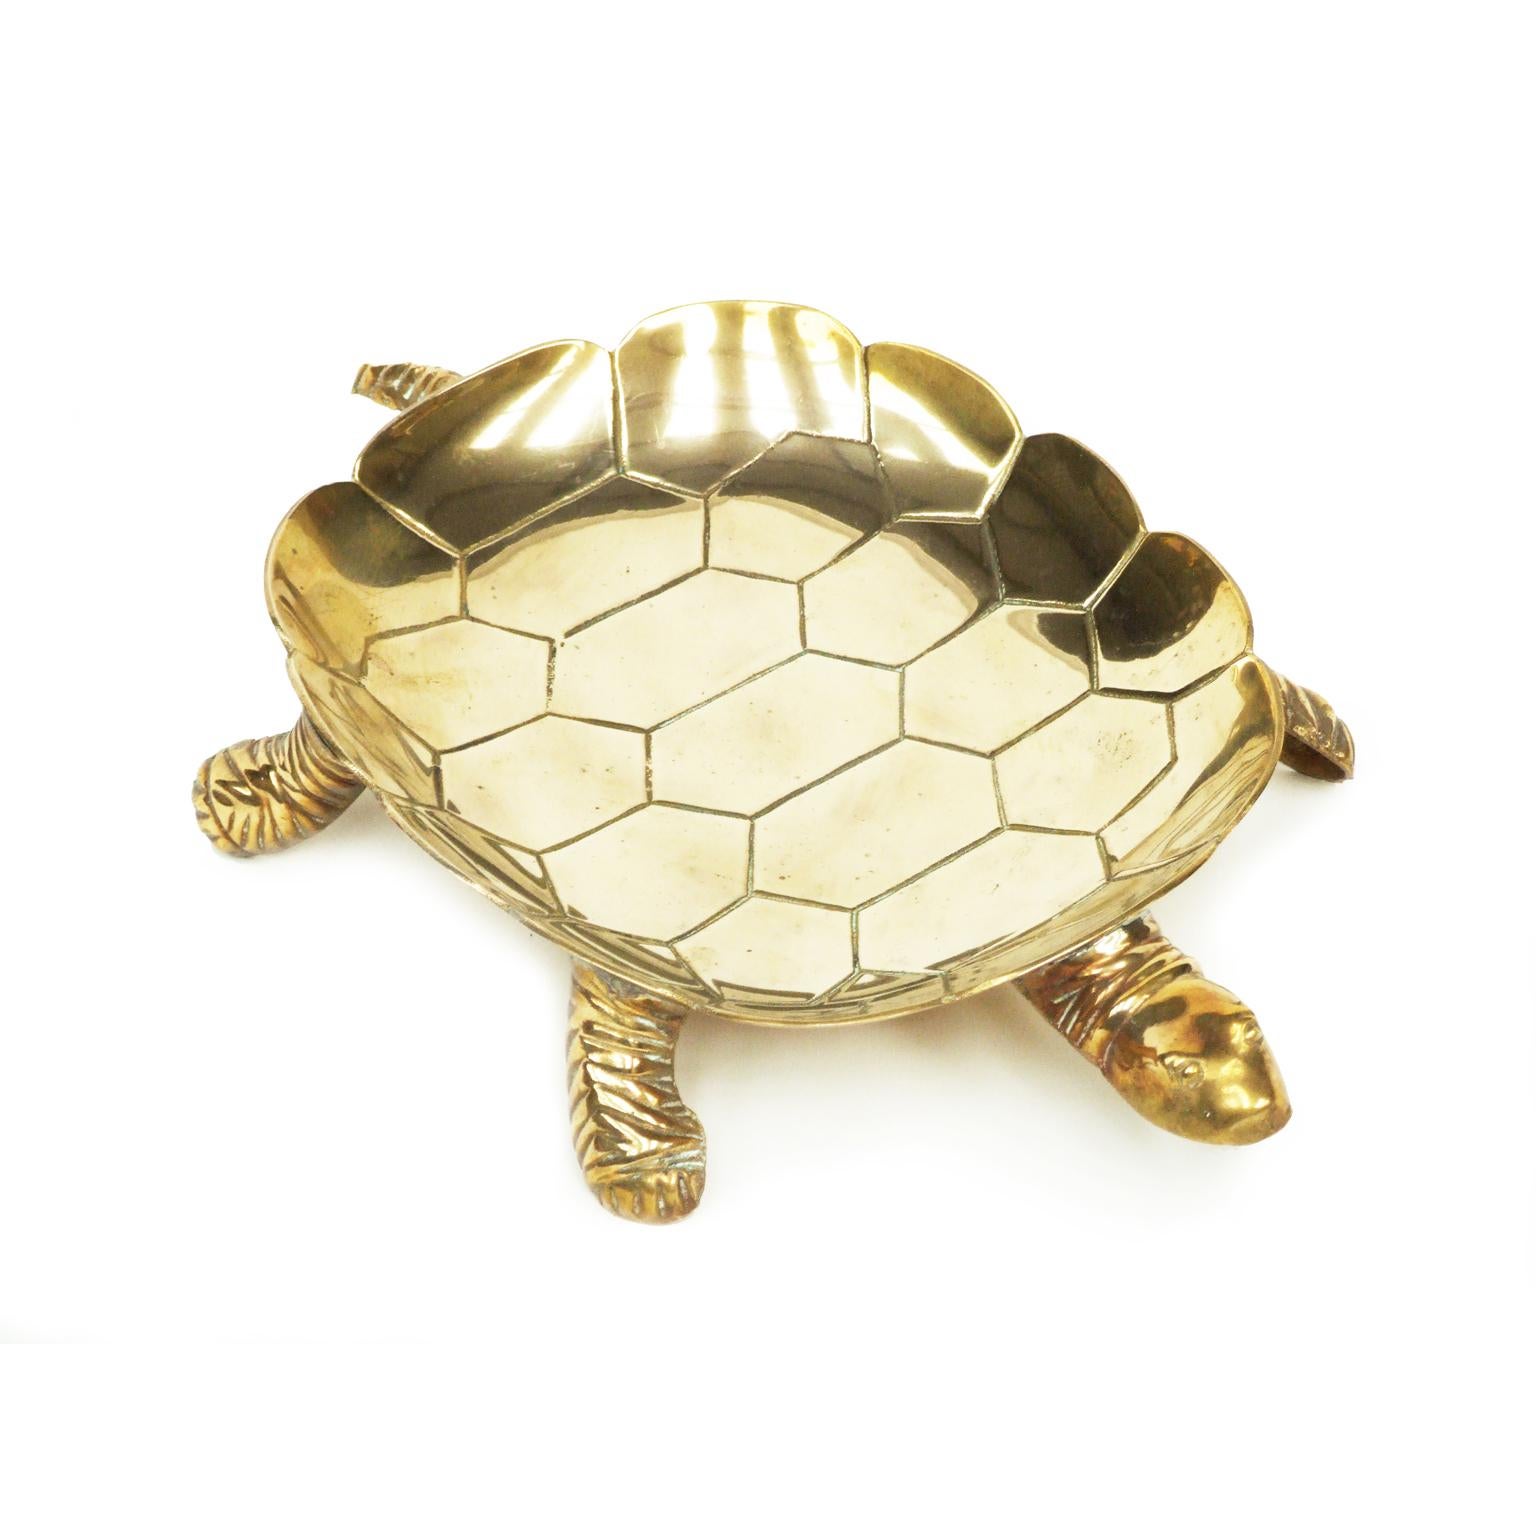 1950s brass turtle dish designed and made in France.

Measures: H 6cm x L 34cm x W 22cm.